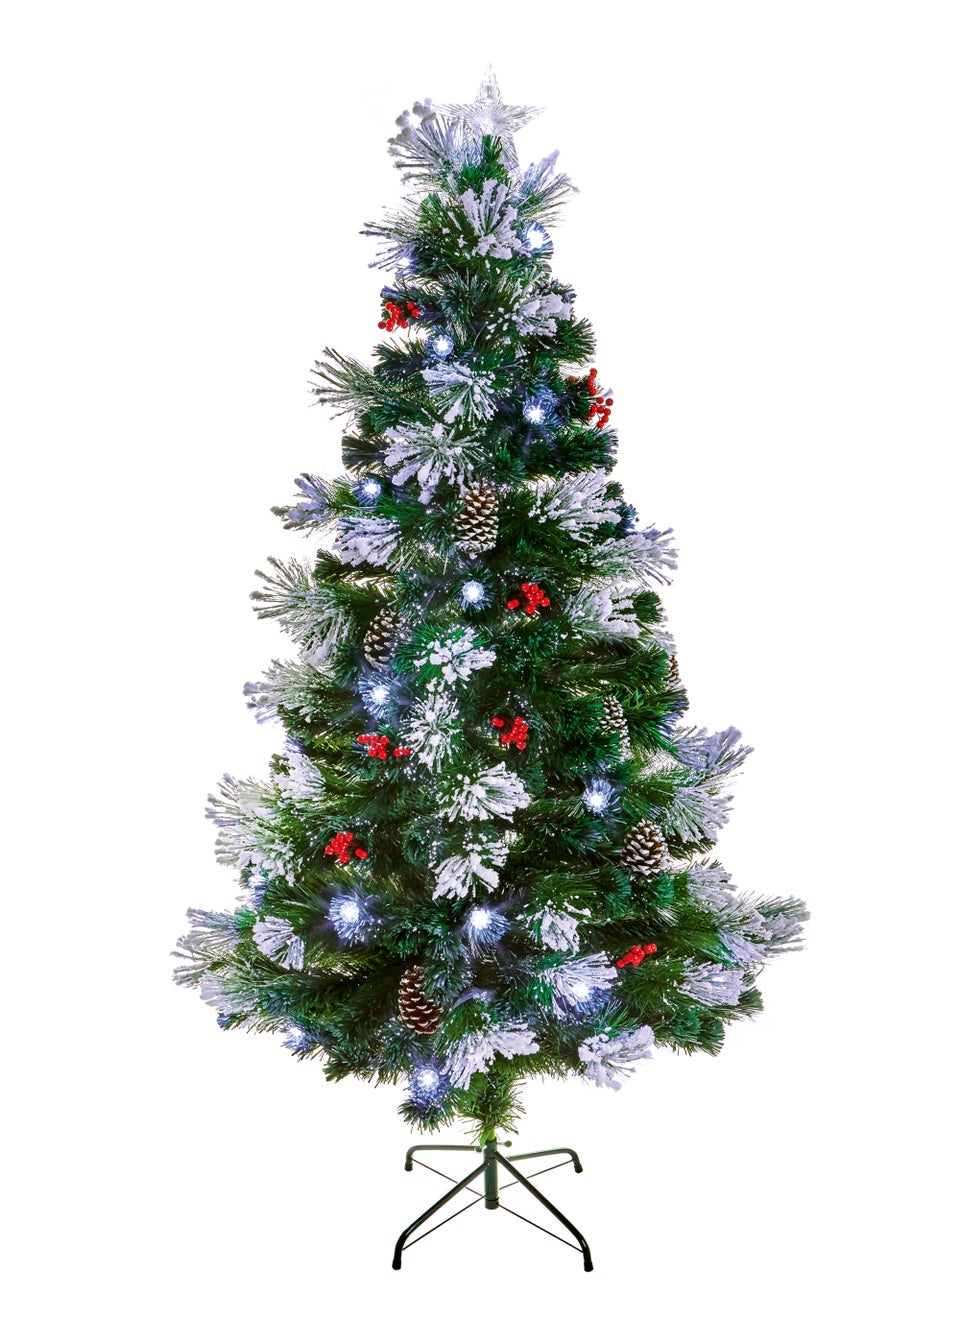 Premier Decorations Snow Tipped Fibre Optic Tree with Pine cones Berries and White LEDs 5ft